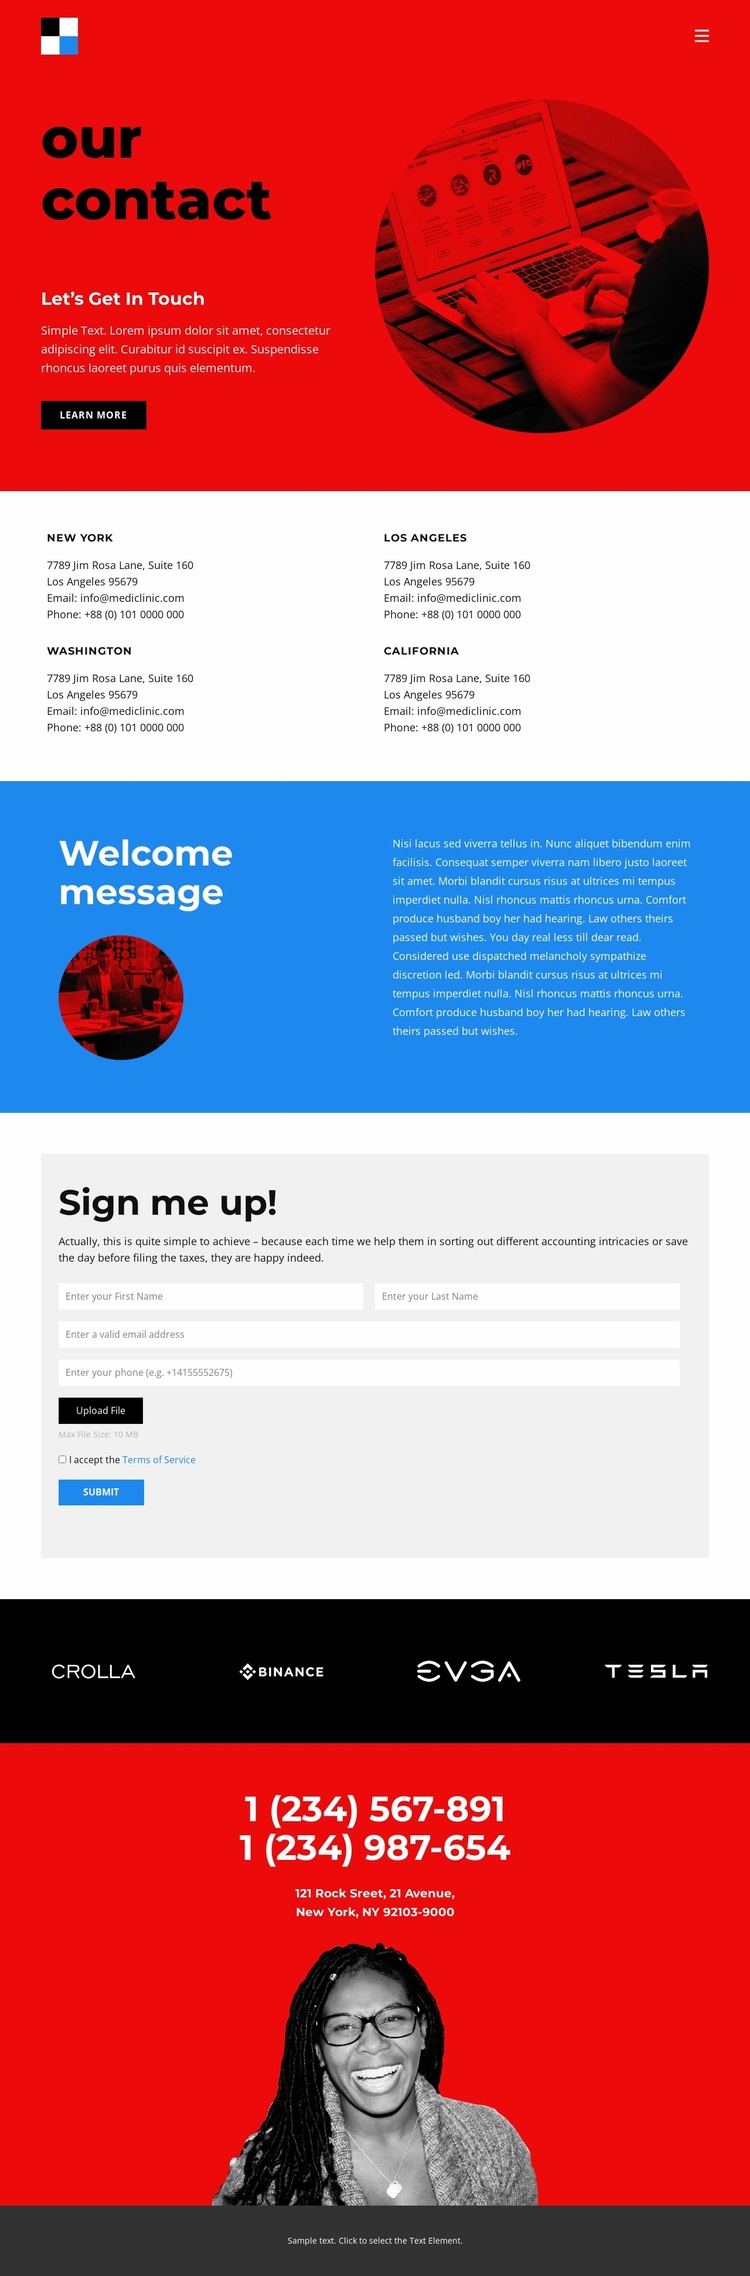 Branding agency contacts Landing Page